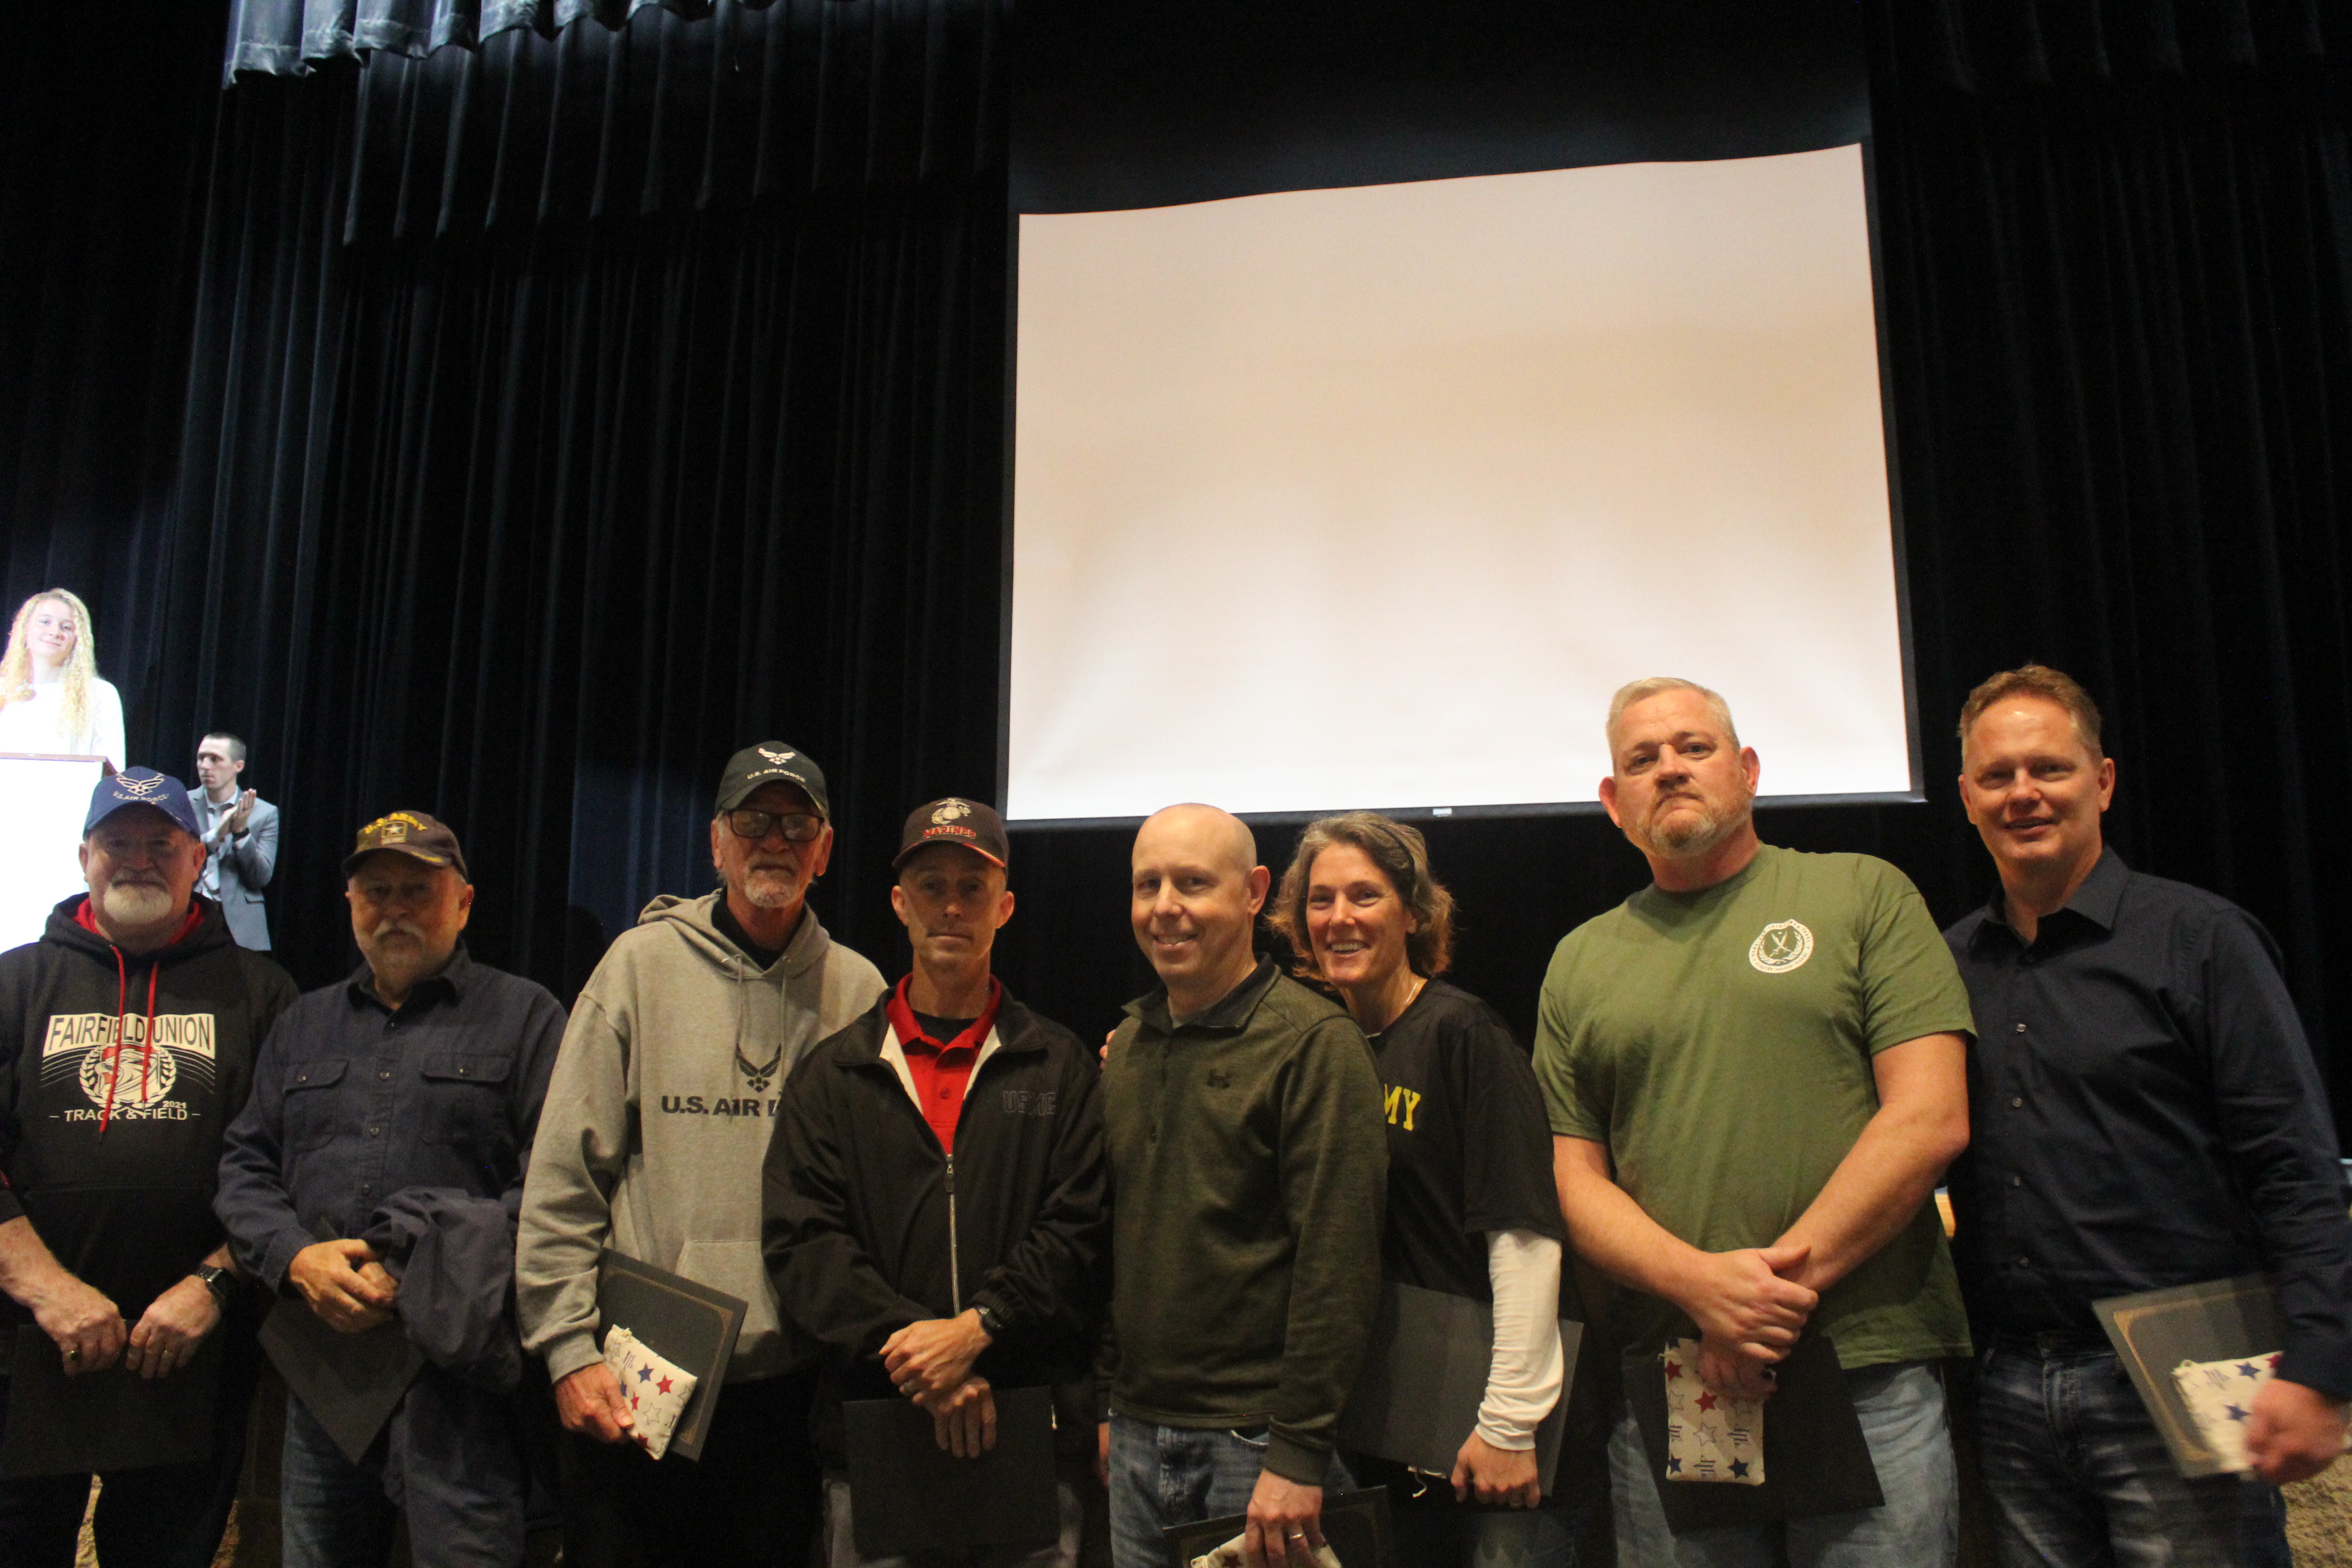 Group Photo of the Veterans in attendance.